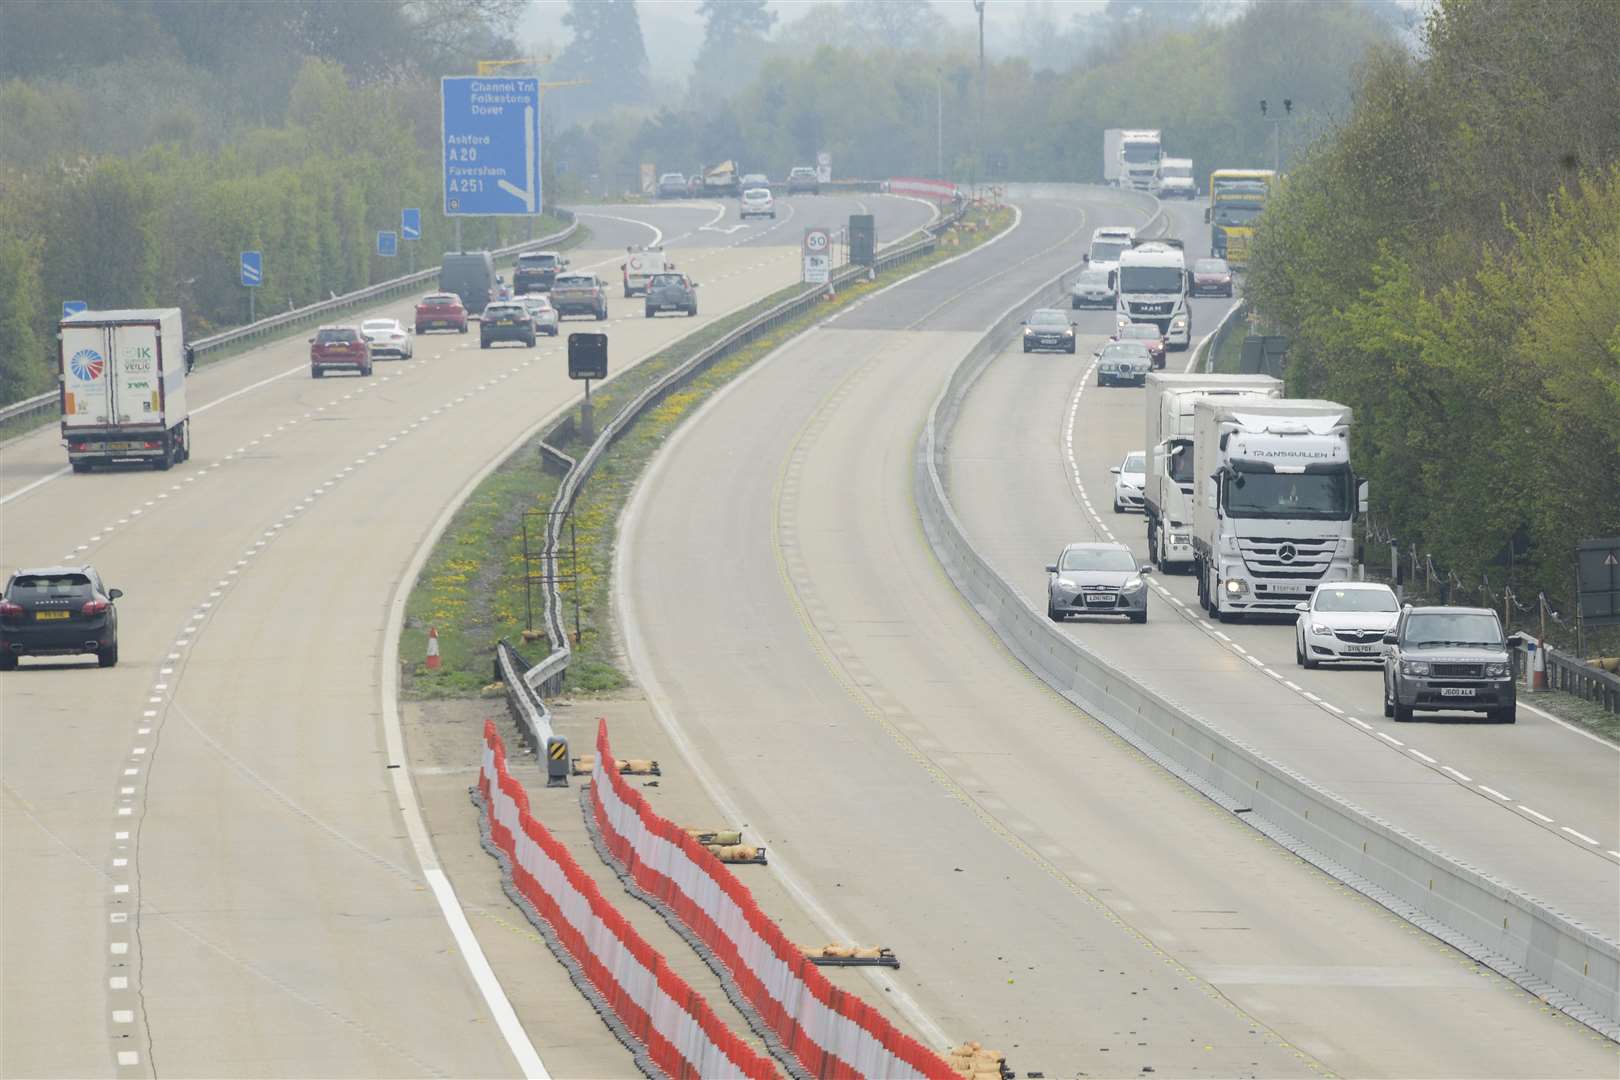 The M20 barrier has been in place since February